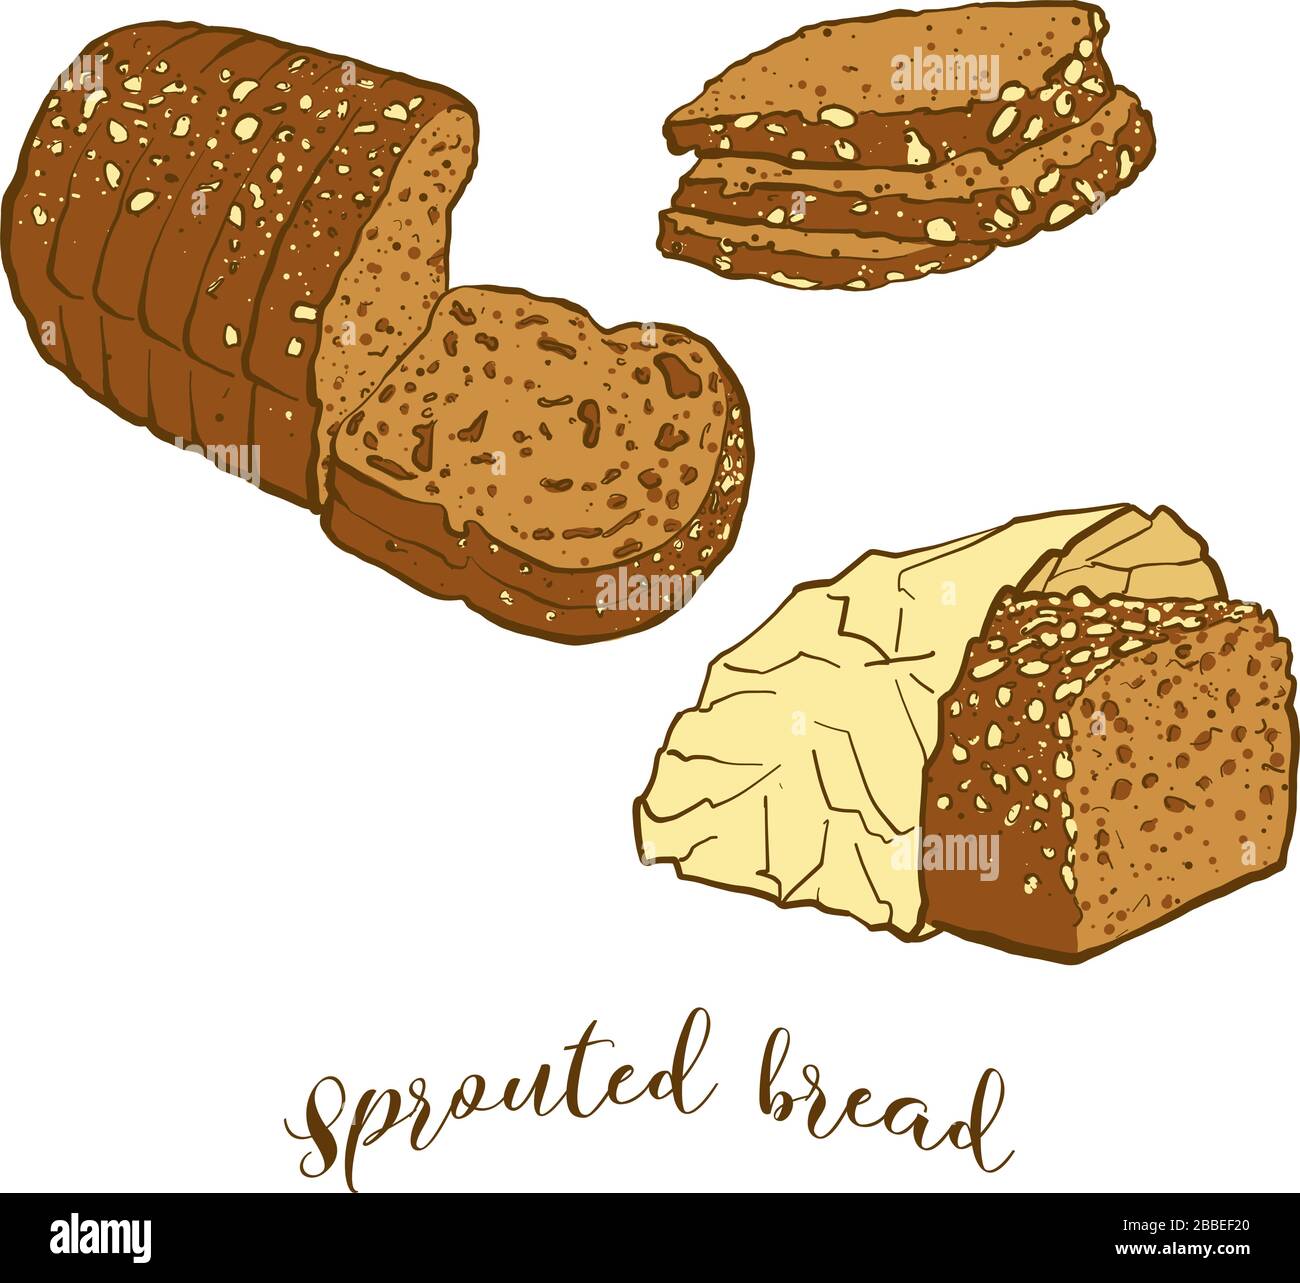 Colored drawing of Sprouted bread bread. Vector illustration of Sprouted food, usually known in Europe. Colored Bread sketches. Stock Vector